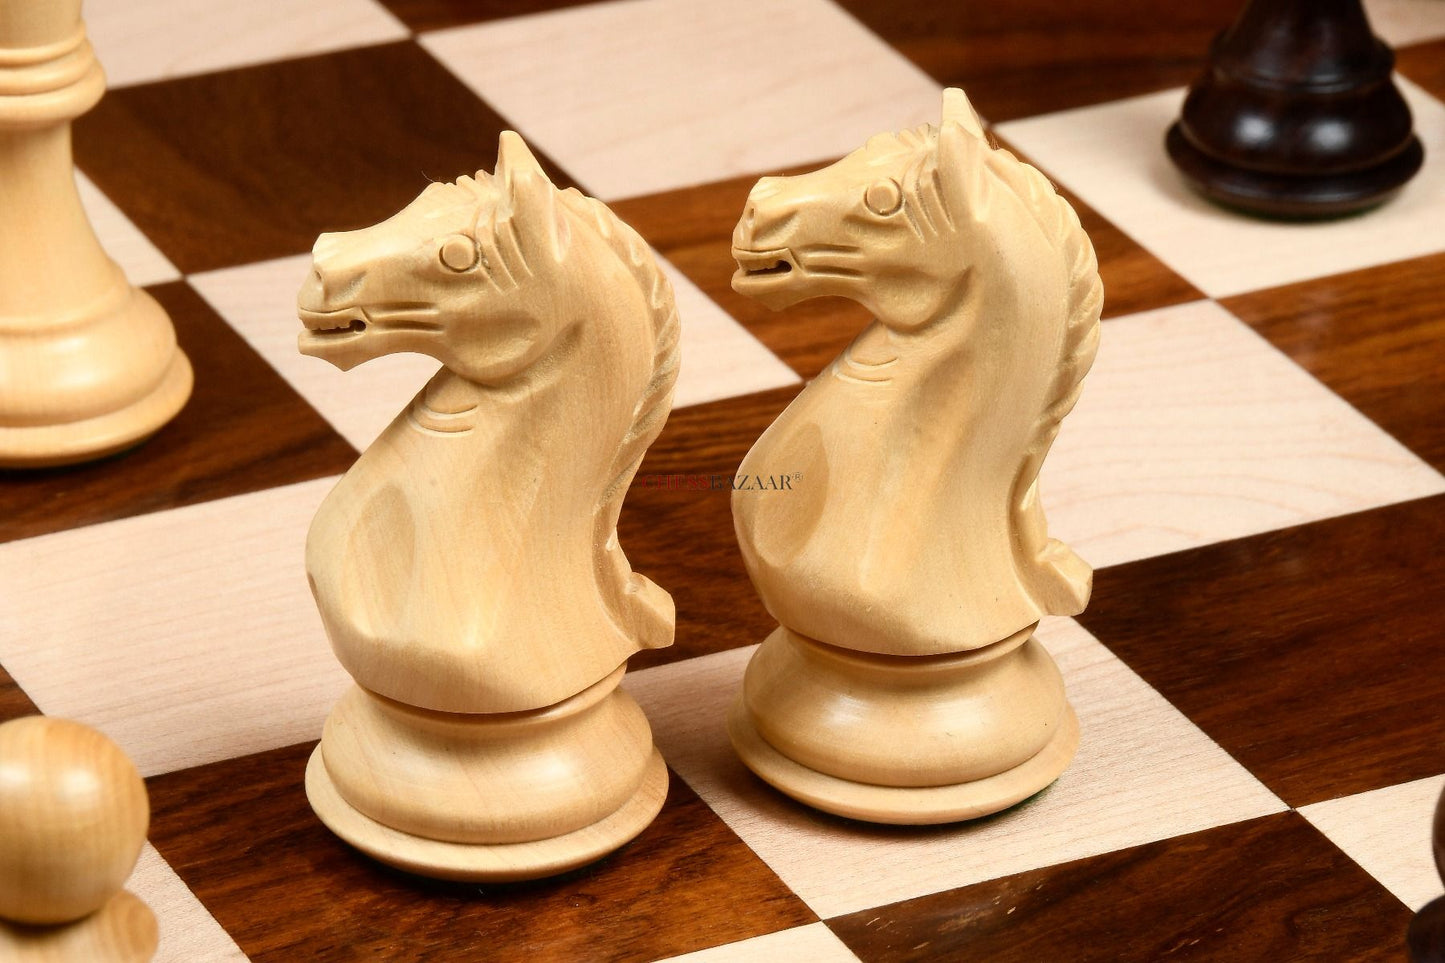 Combo of Fierce Knight Staunton Series Chess Pieces in Rosewood & Box Wood - 4.1" King with Wooden Chess Board 21"